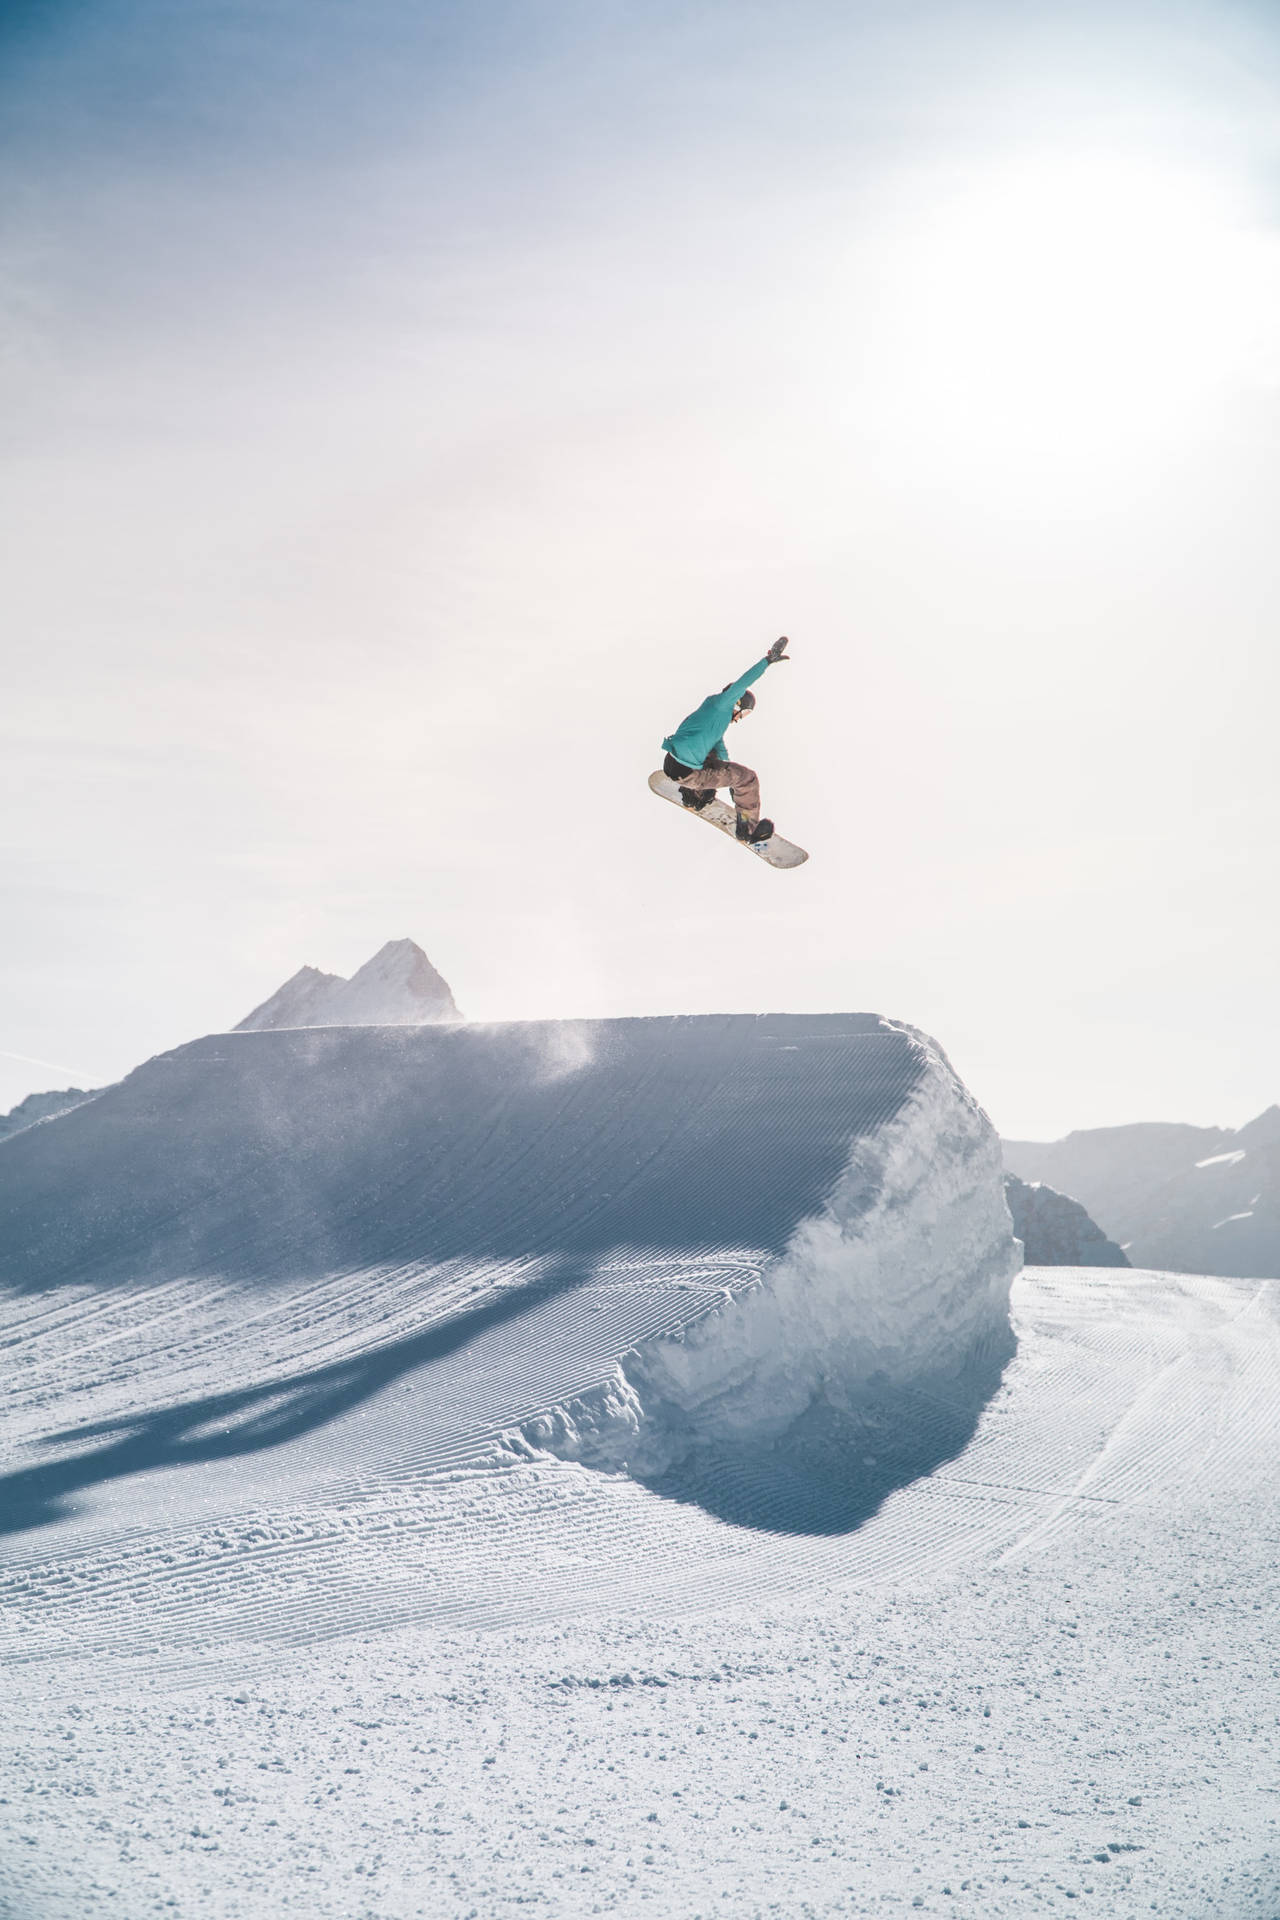 Sport Snowboarding In Snow-Covered Mountain Wallpaper